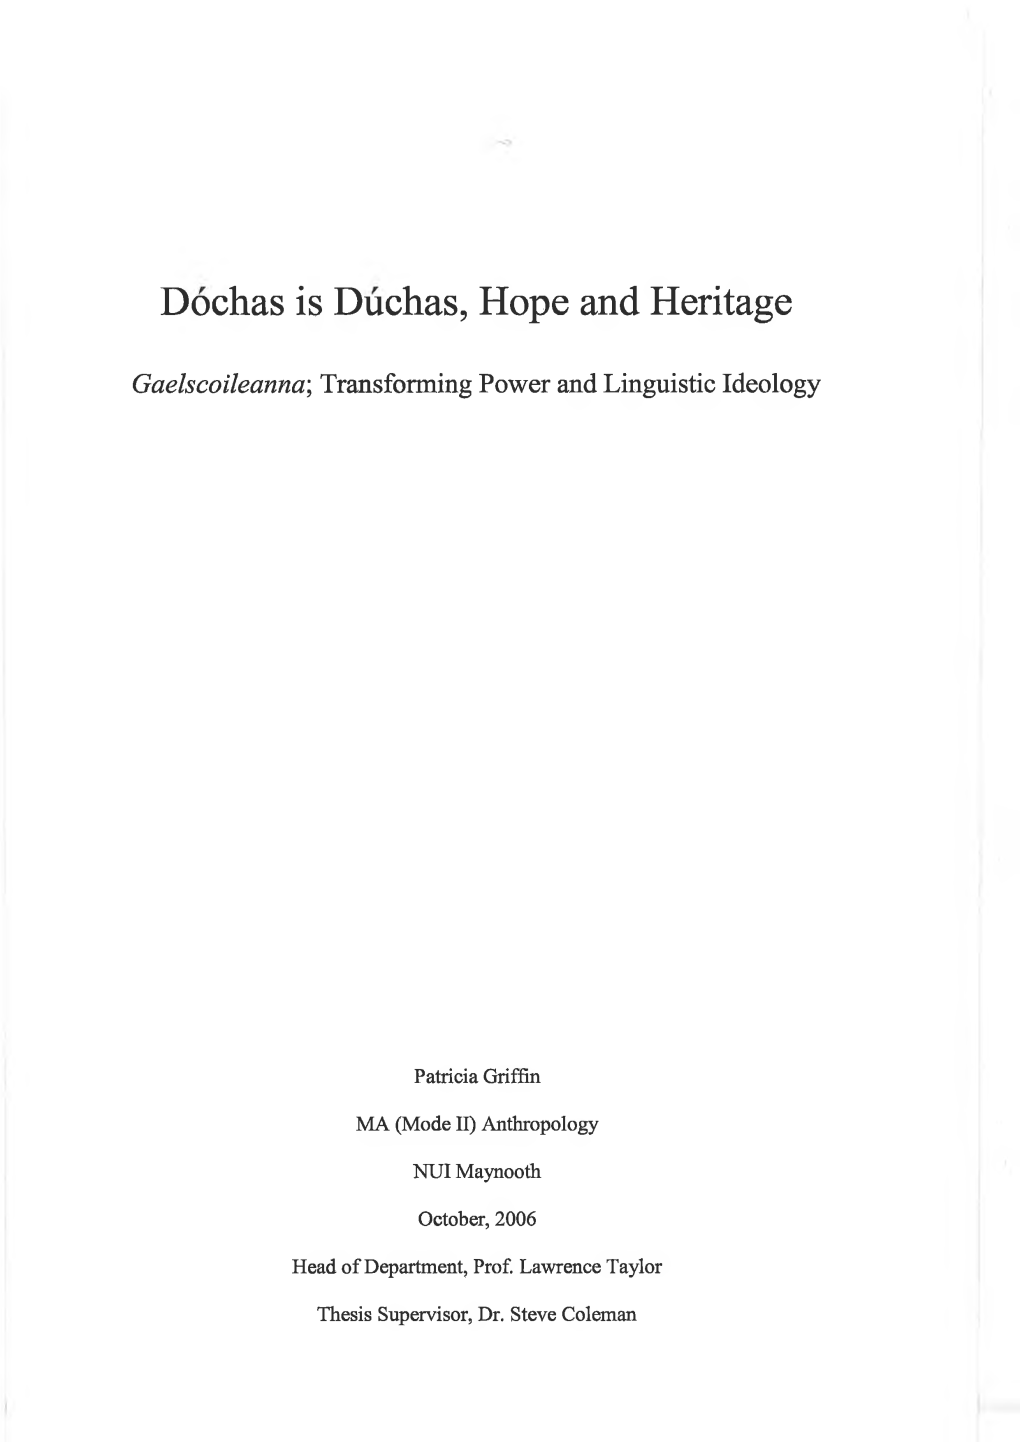 Dochas Is Duchas, Hope and Heritage